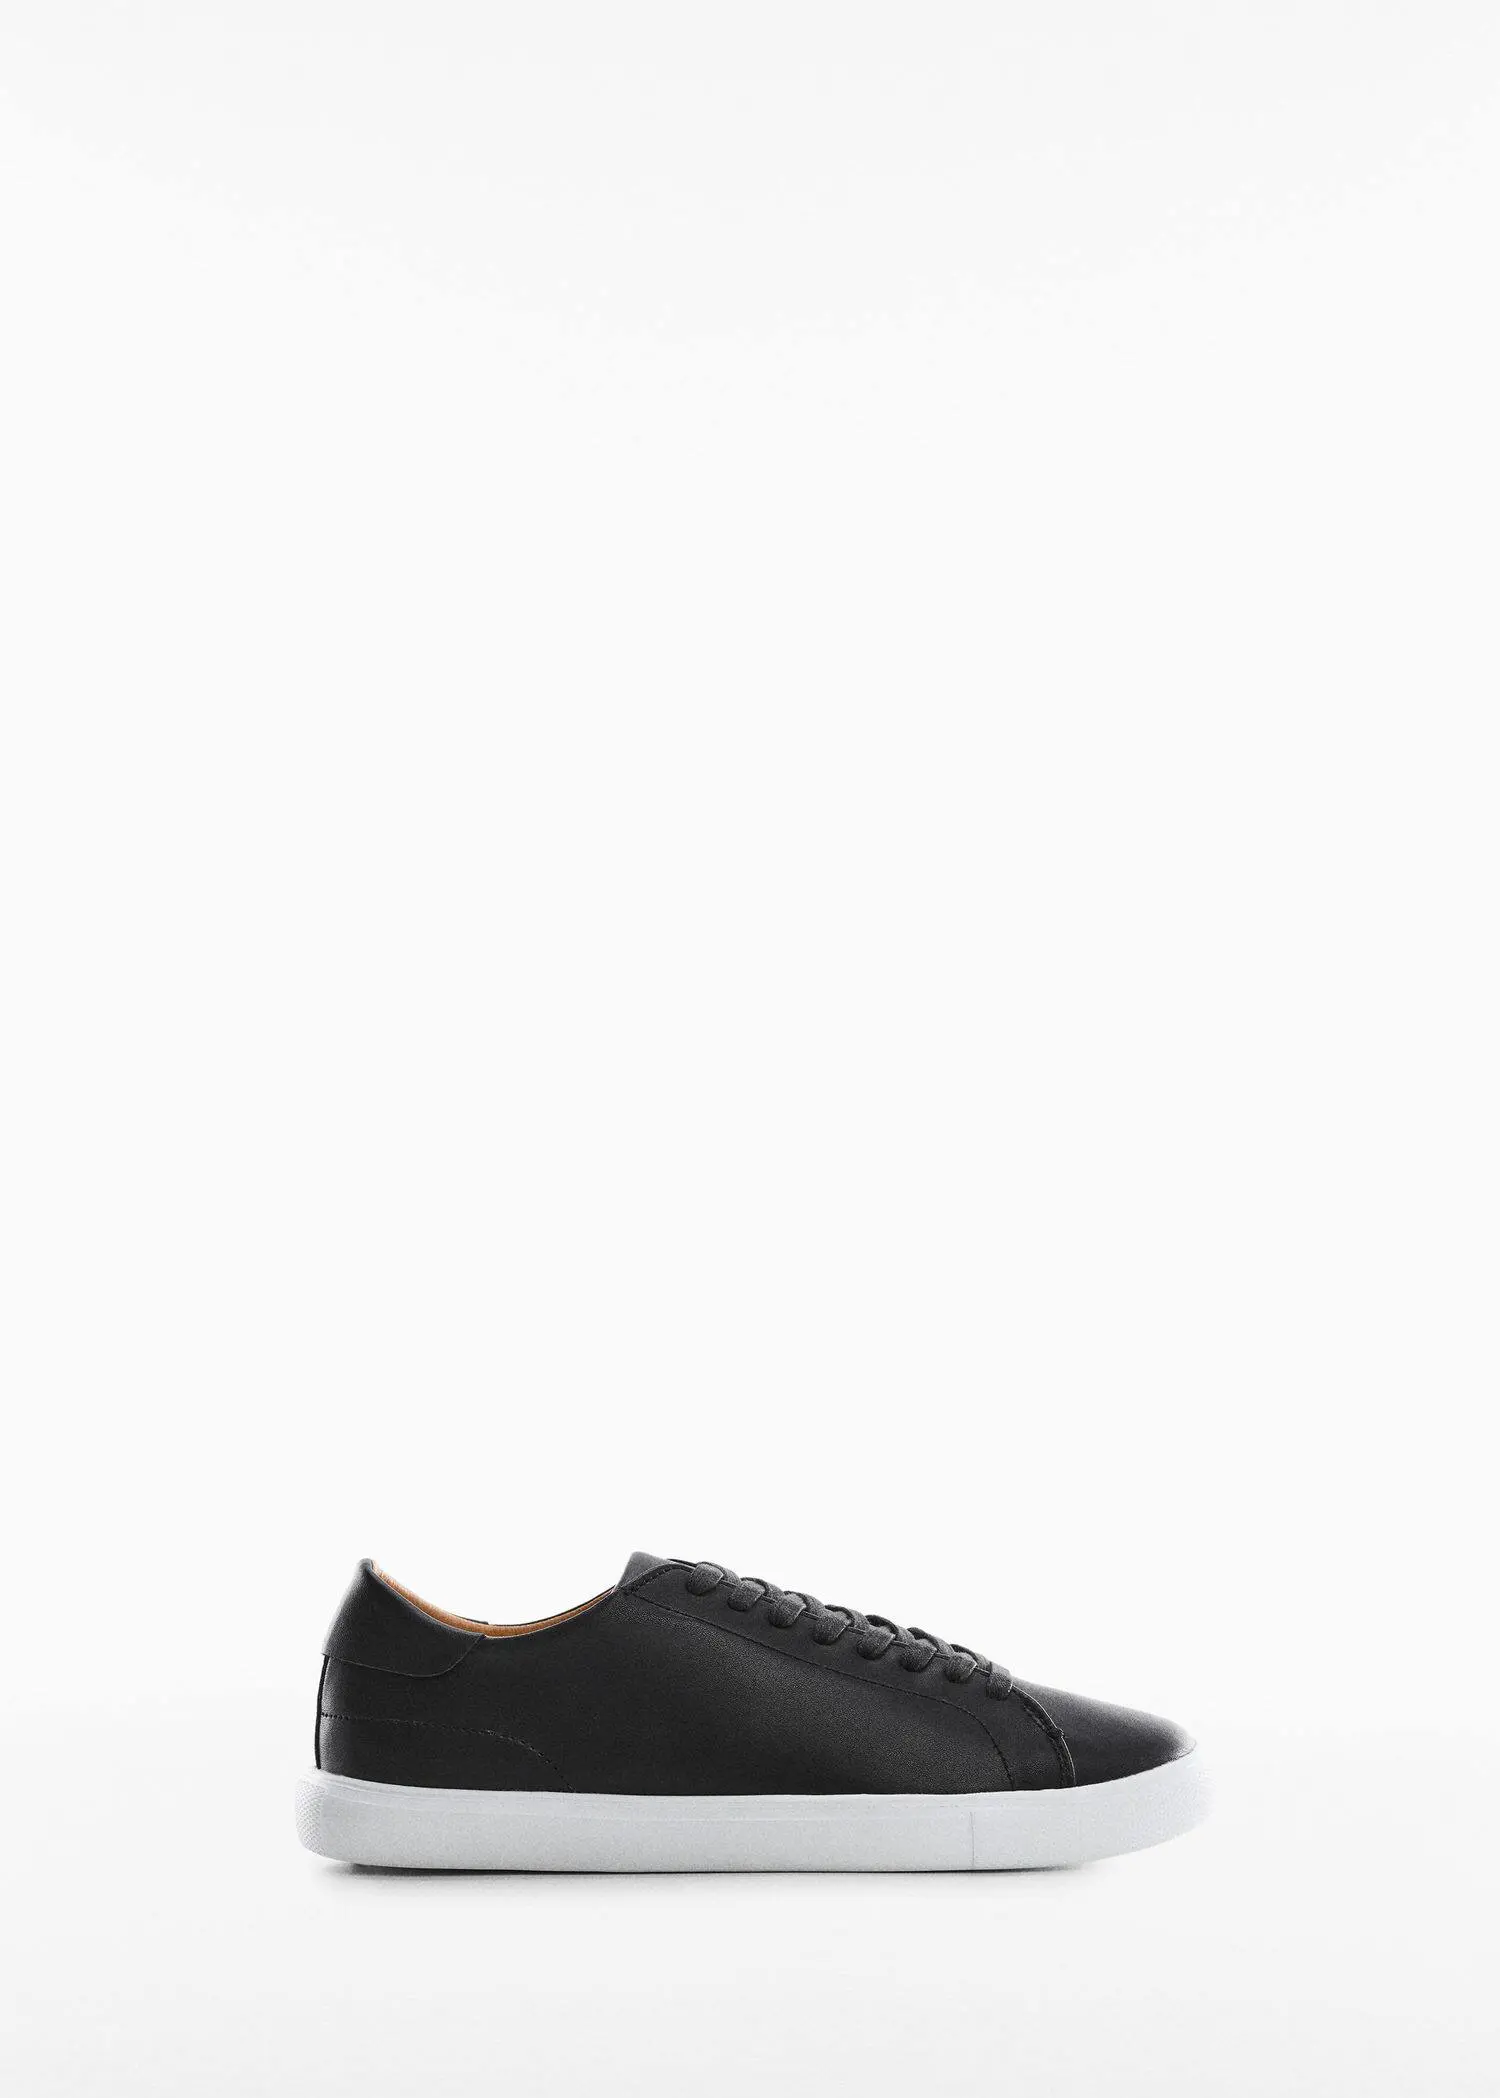 Mango Monocoloured leather sneakers. a pair of black shoes on a white background. 